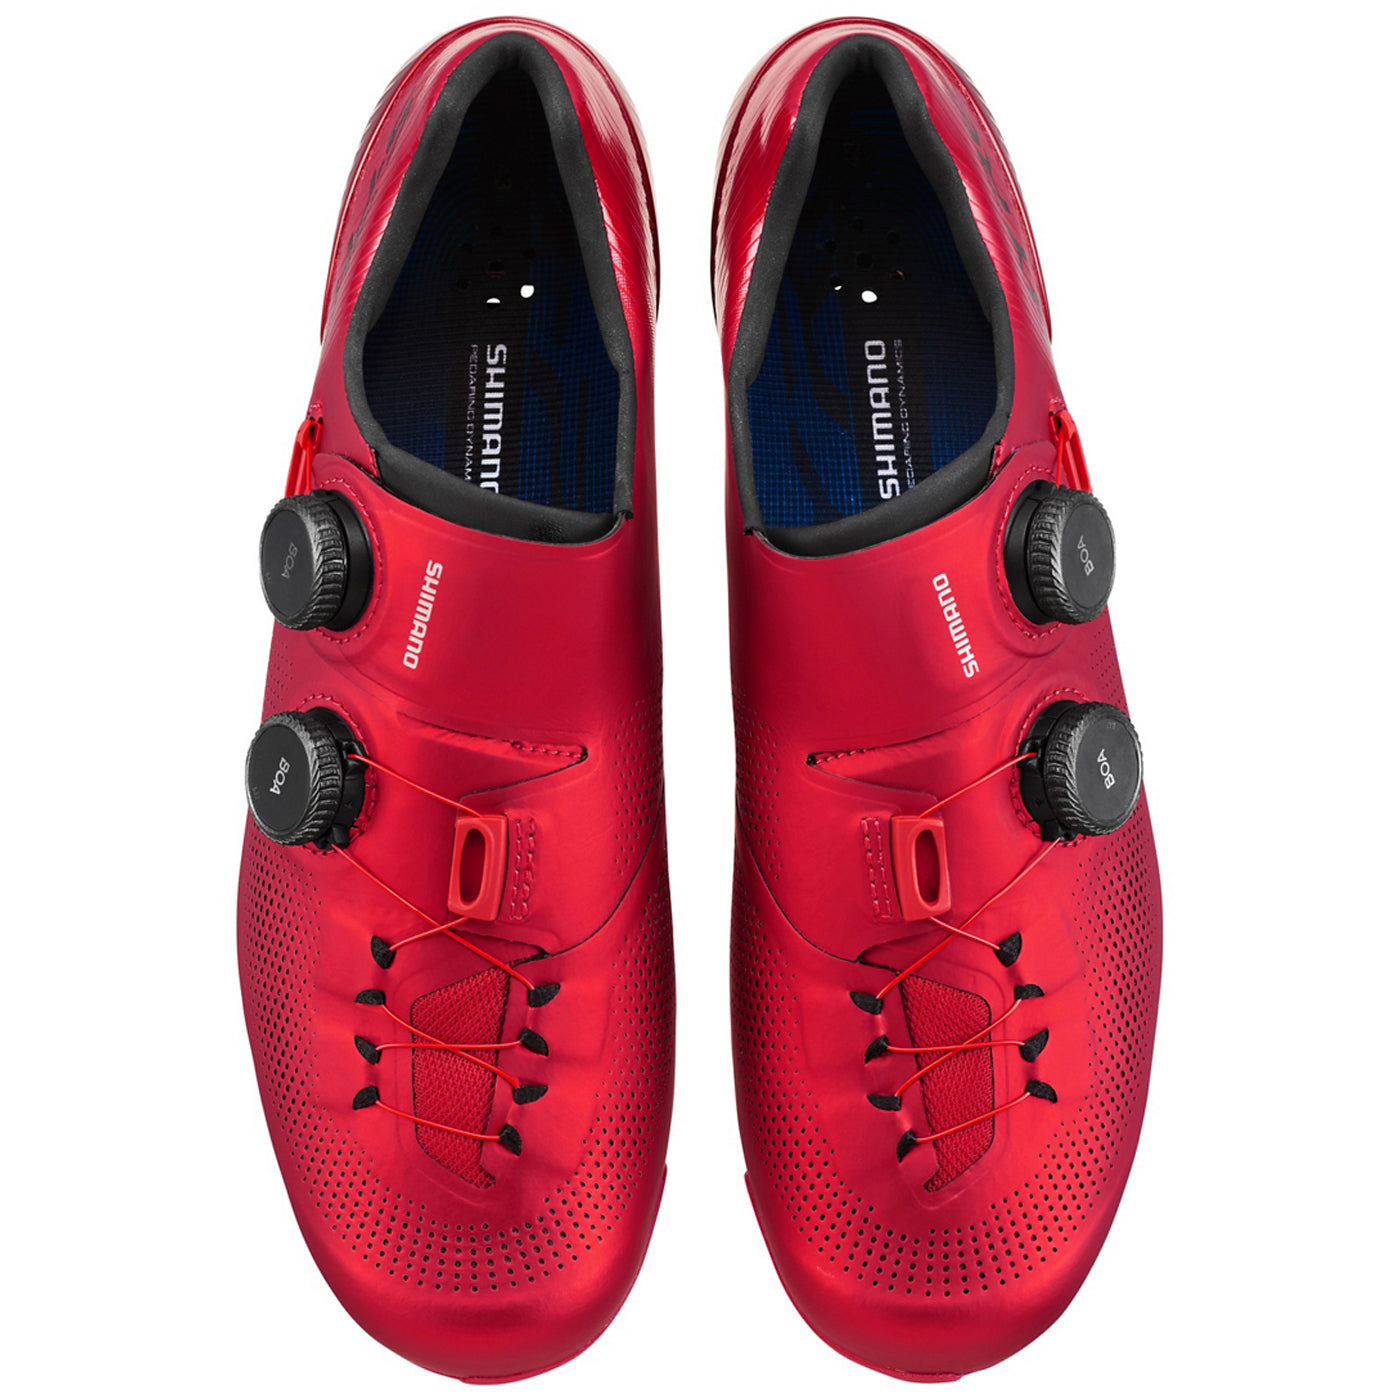 Shimano S-Phyre RC903 shoes - Red